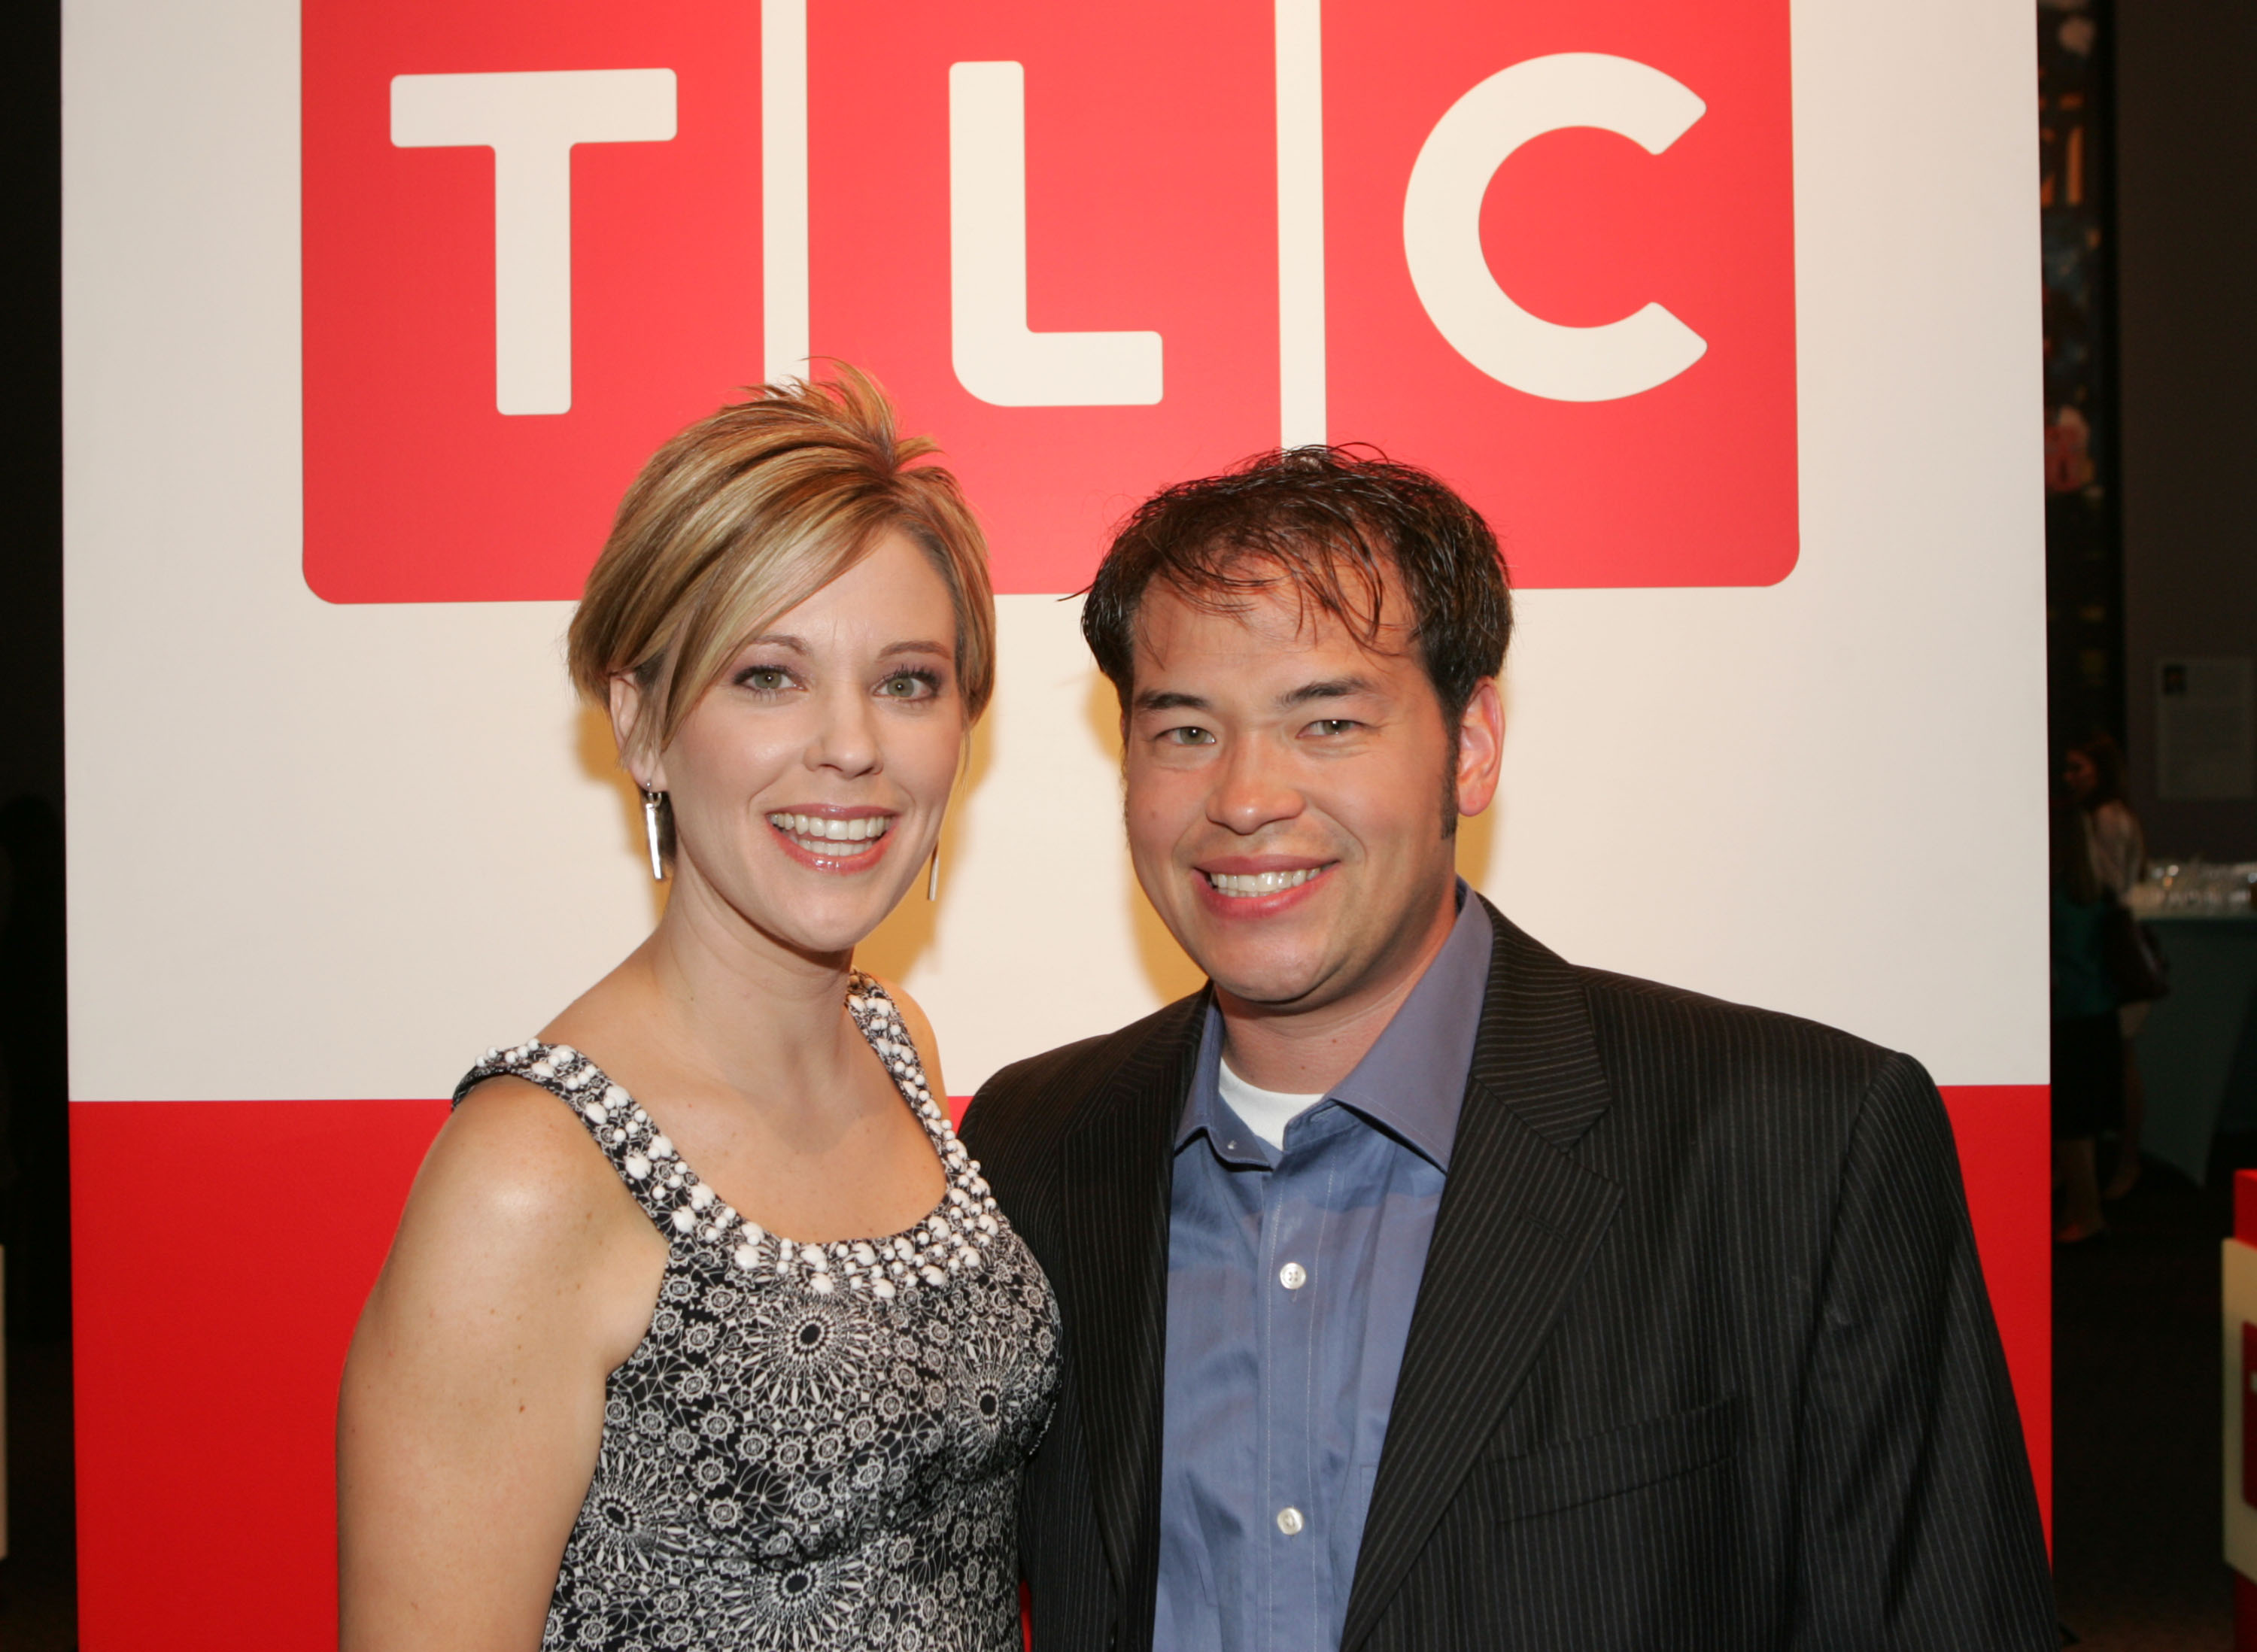 Jon and Kate Gosselin attend the Discovery Upfront Presentation NY in 2008